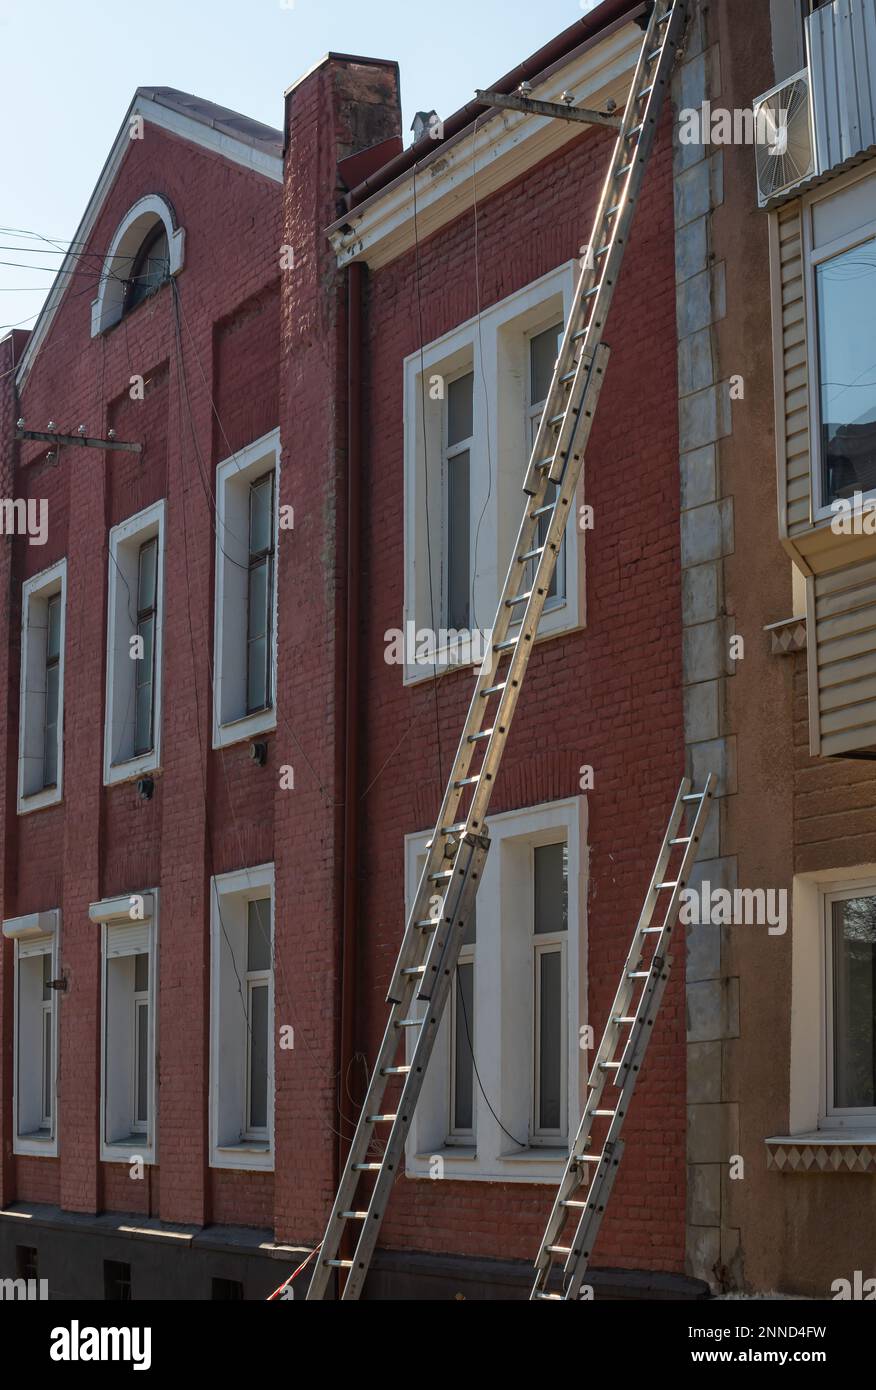 An extension ladder leans against the front of a multifamily housing building in preparation of roof repairs. Stock Photo